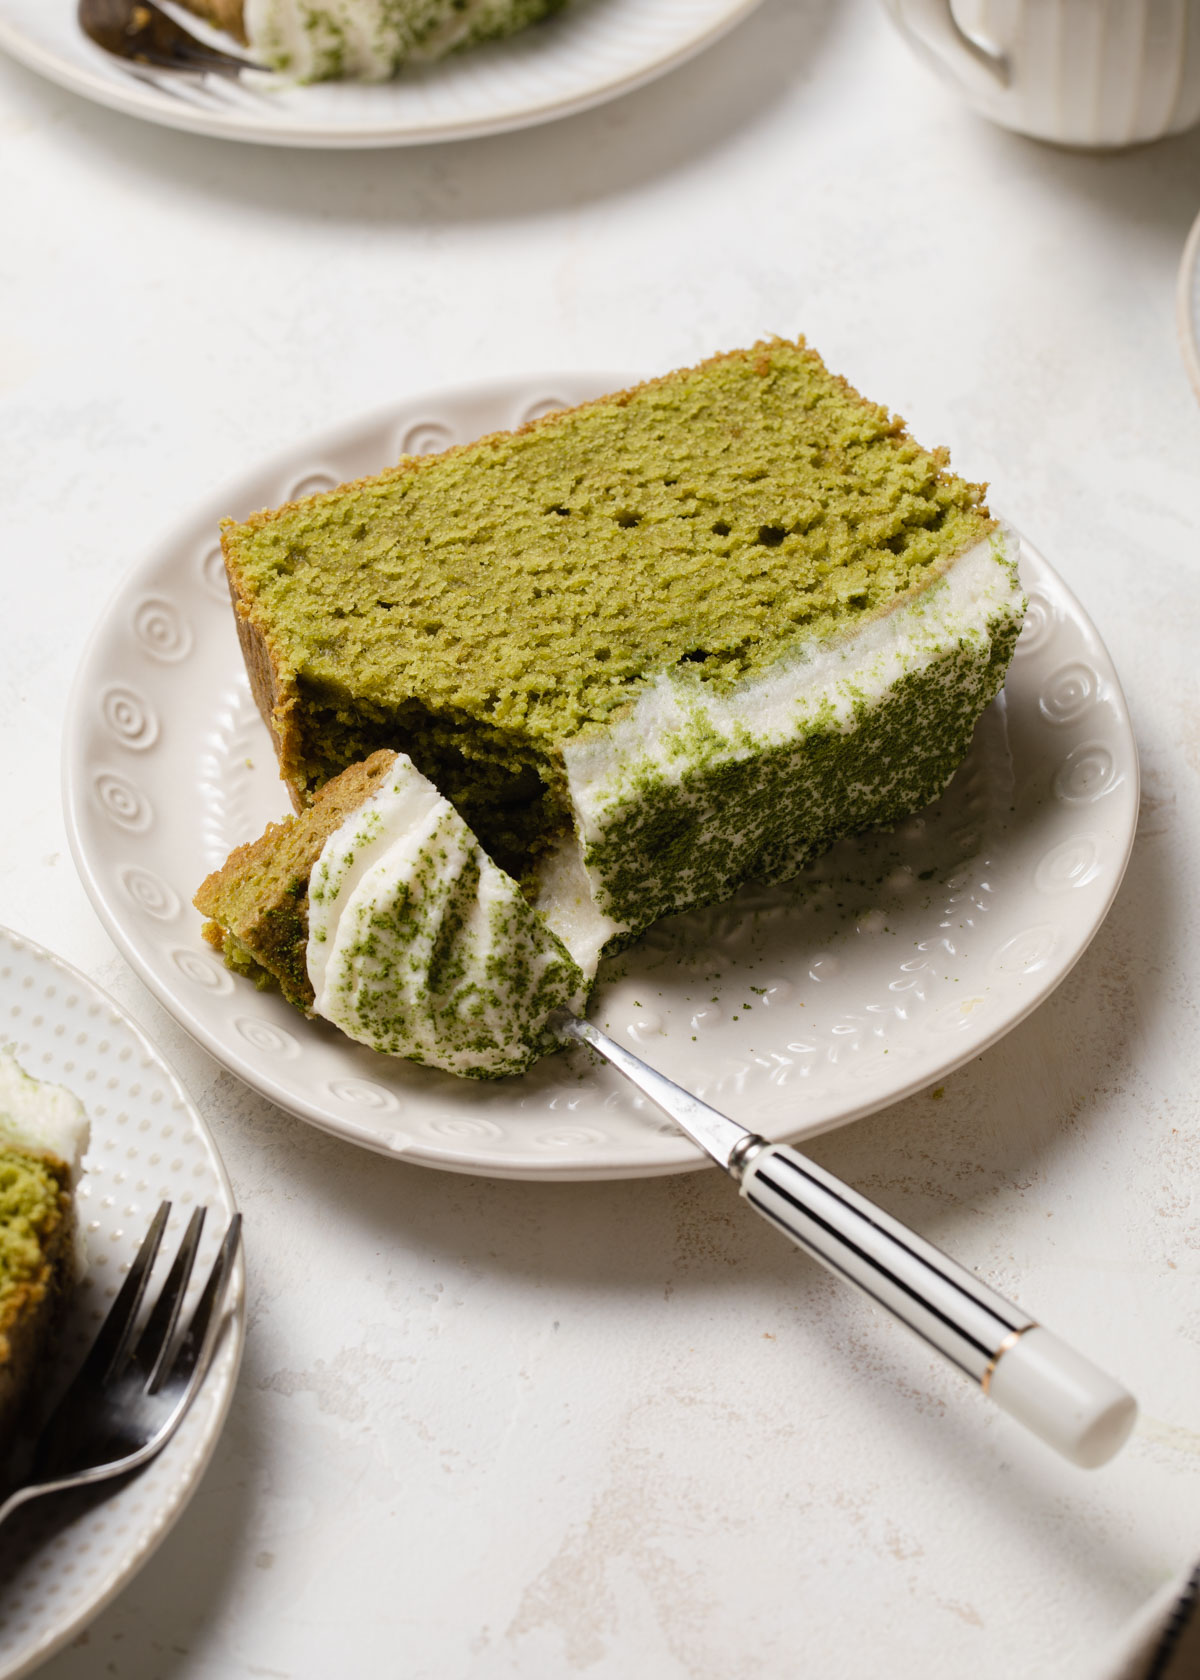 A slice matcha cake with coconut frosting on top